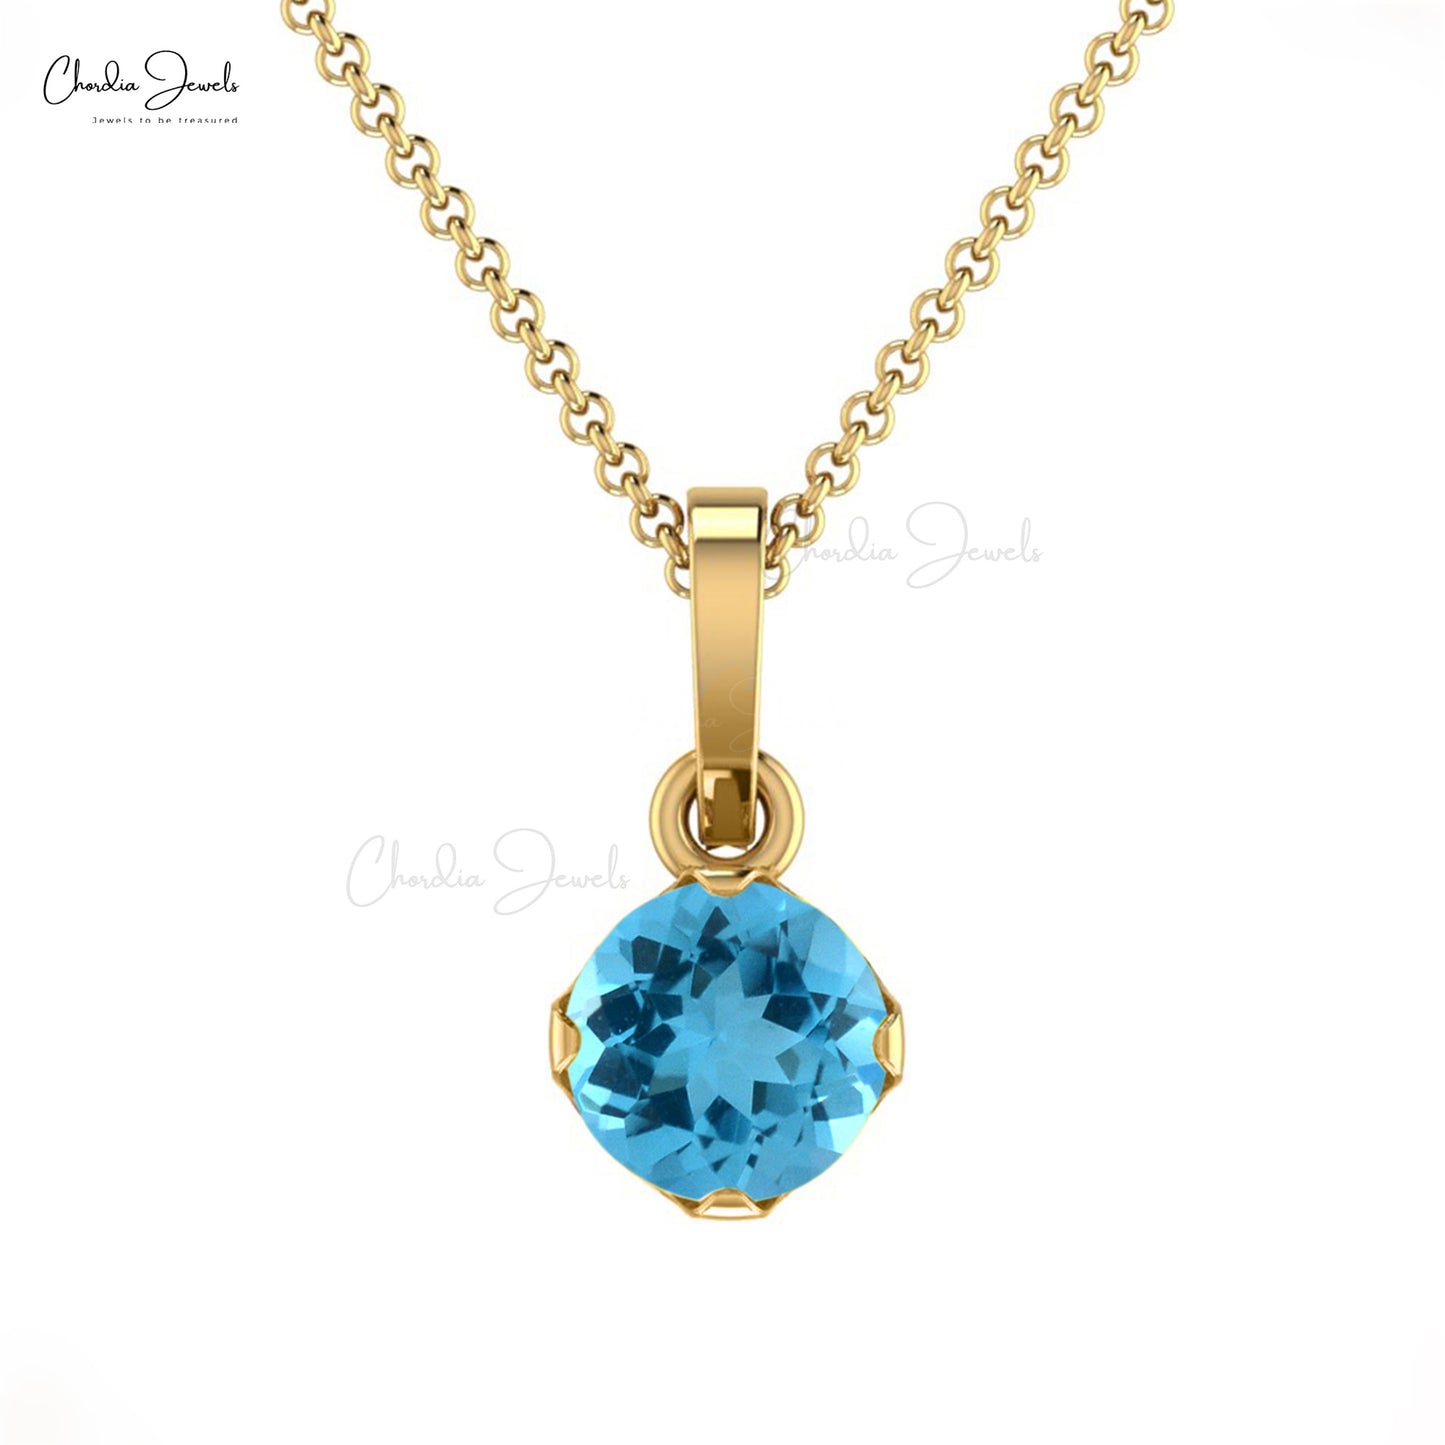 AAA Swiss Blue Topaz Solitaire Pendant 4mm Round Gemstone Minimalist Pendant 14k Solid Gold Handmade Pendant For Her